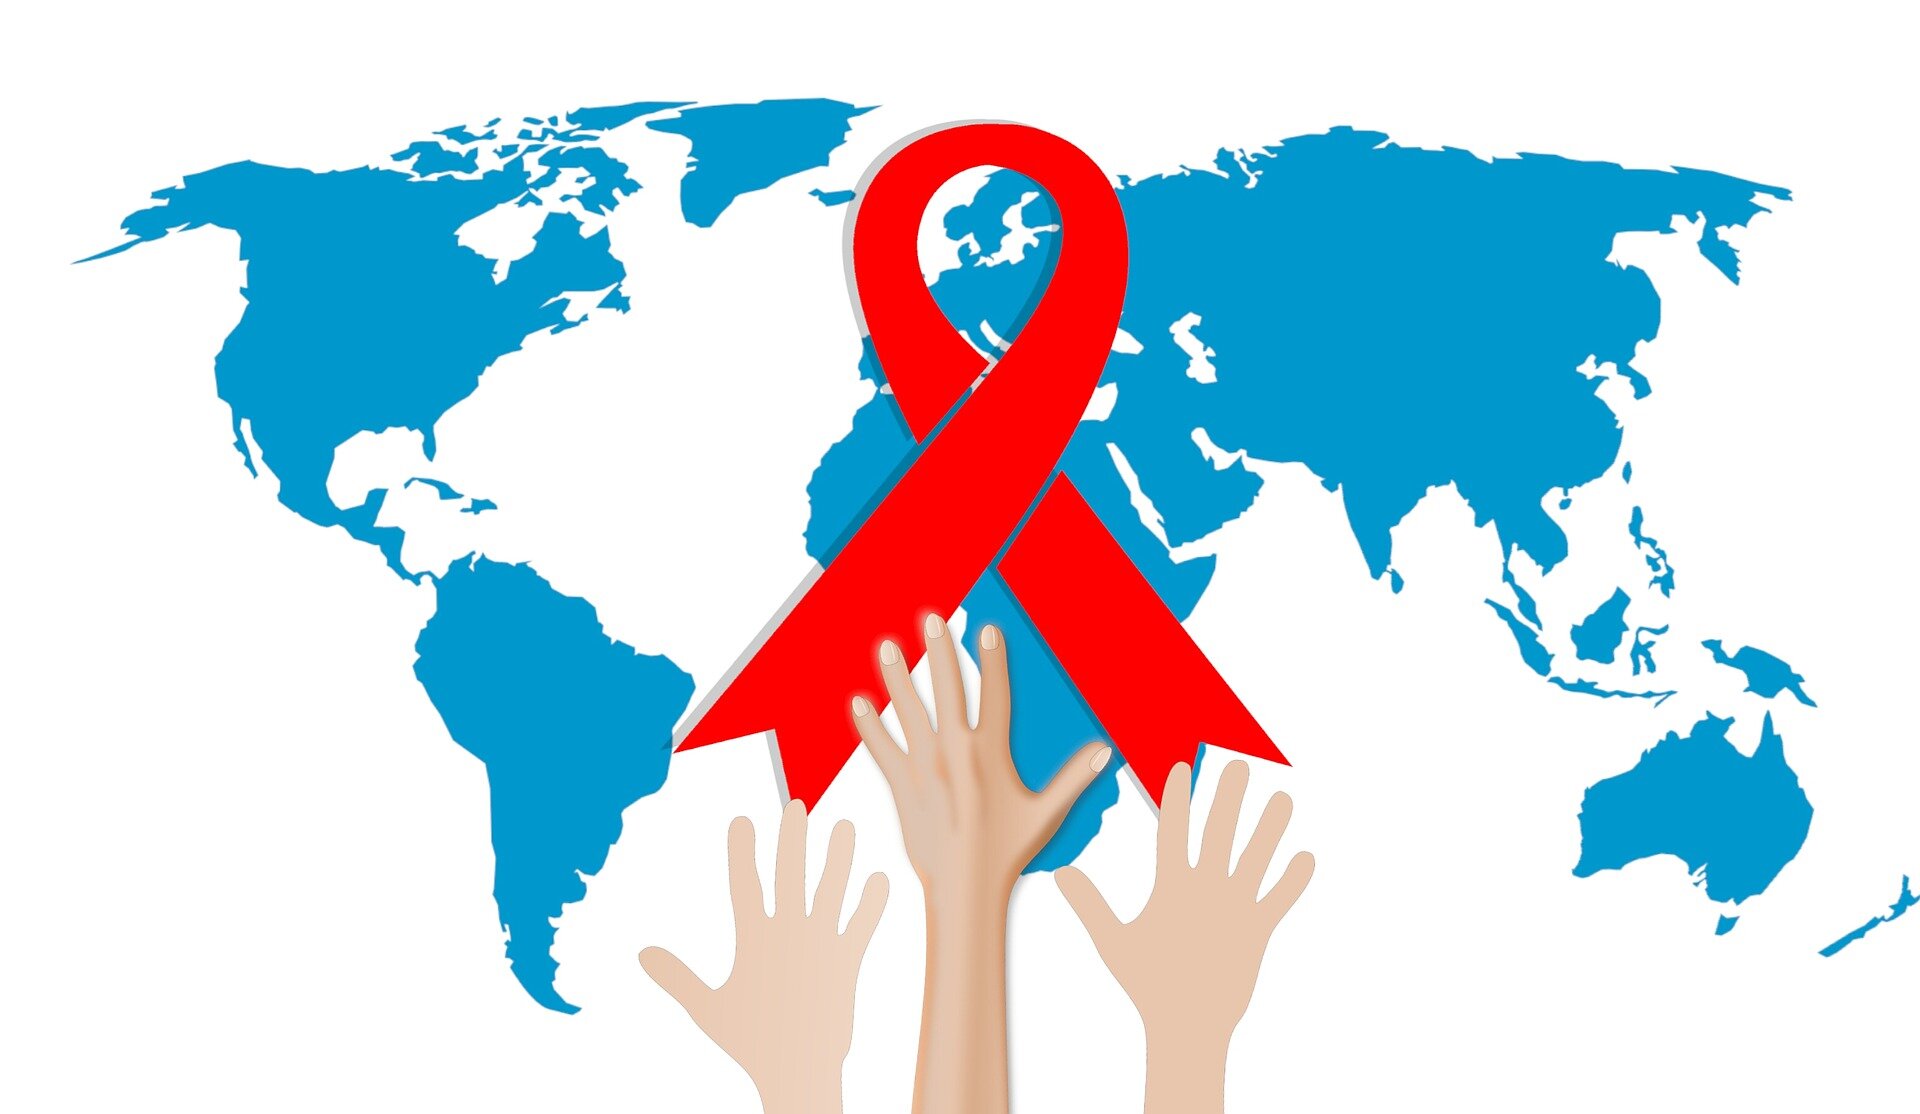 #Increased support needed for a coordinated global HIV and COVID-19 response